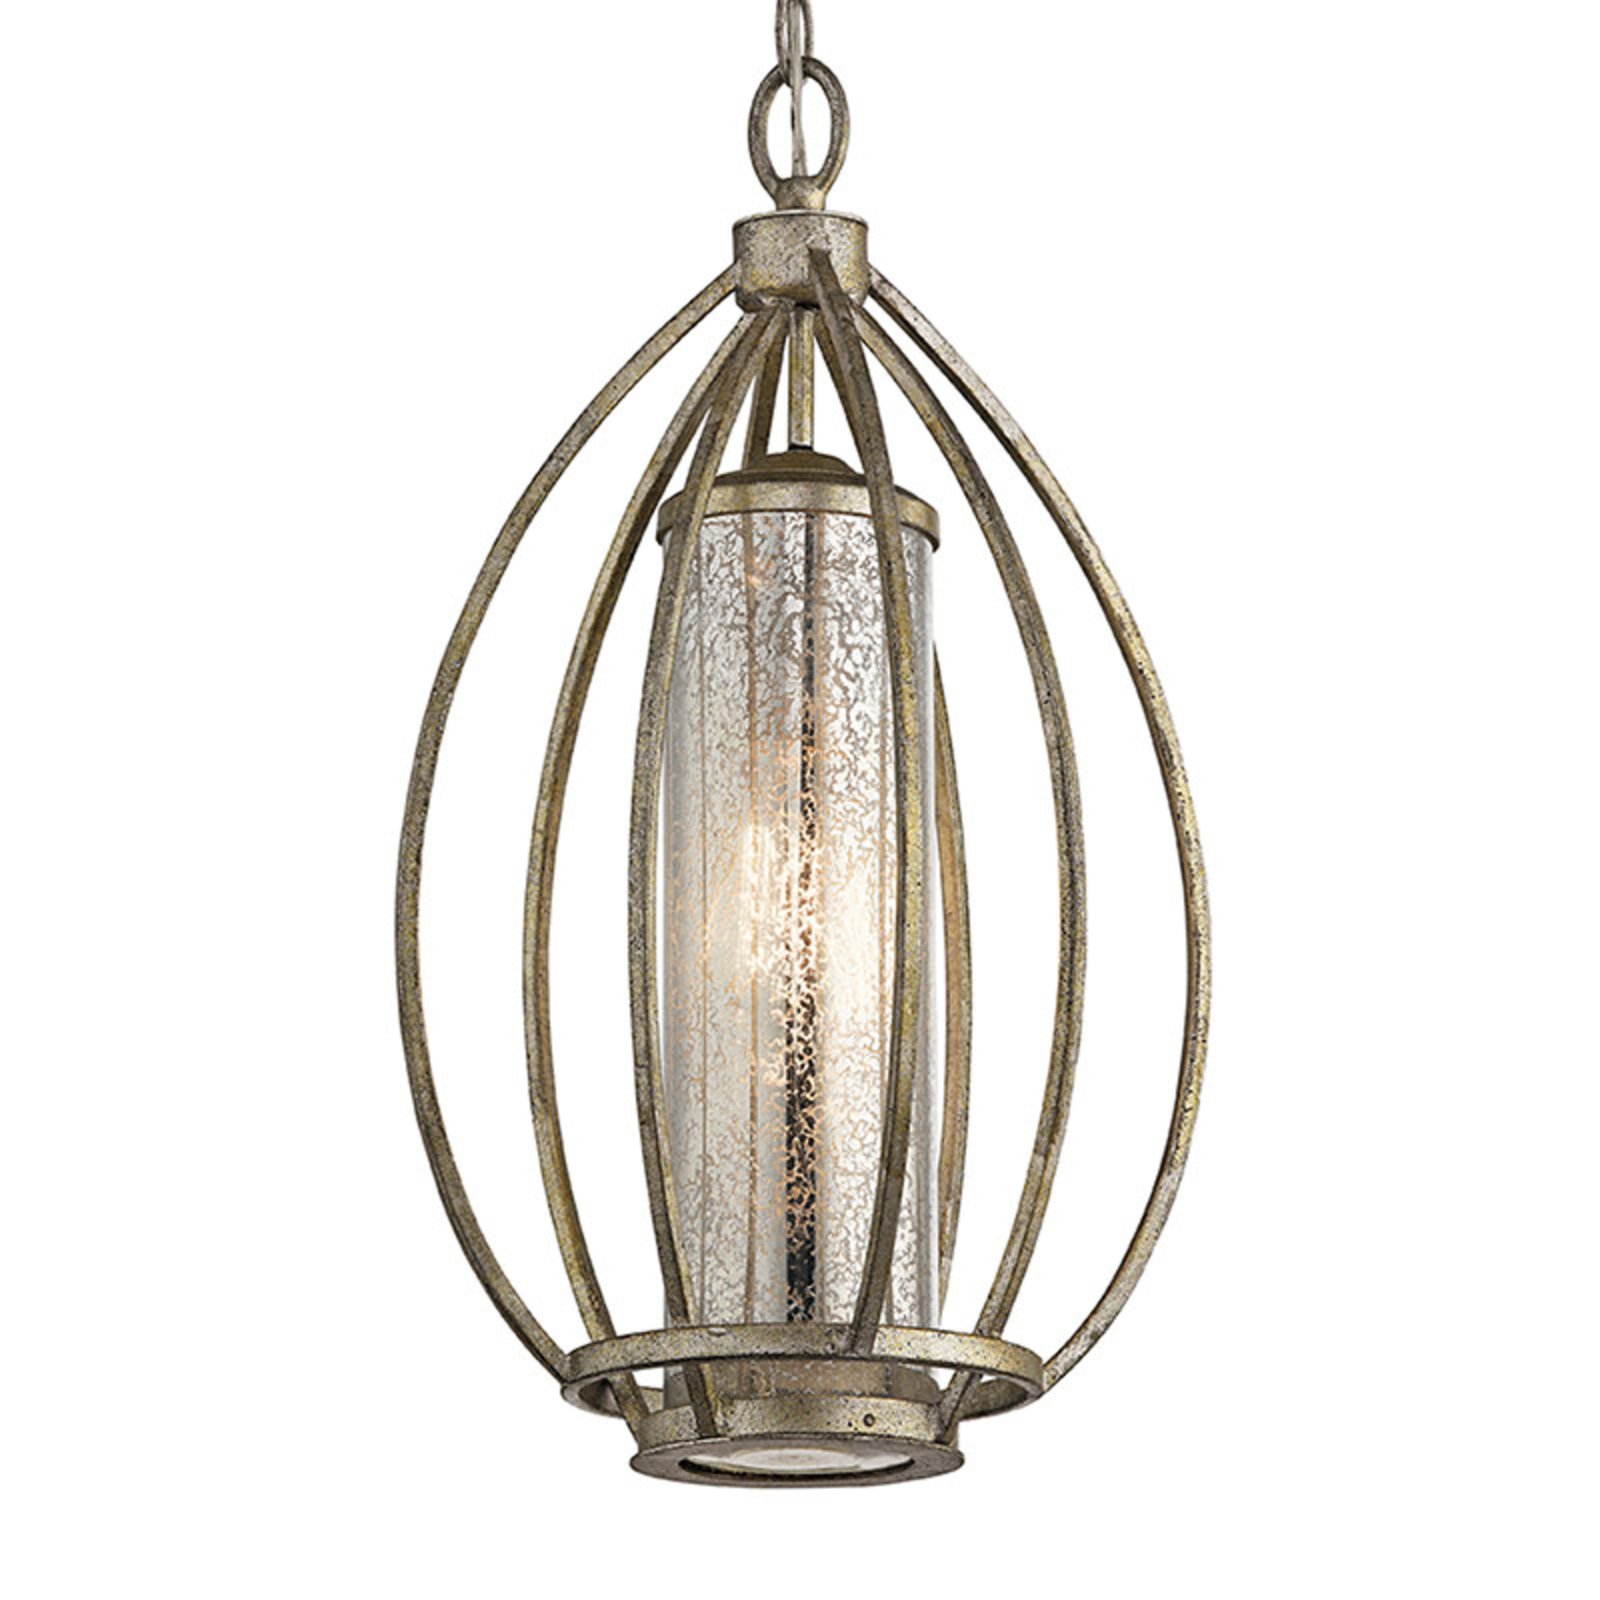 Rosalie hanging lamp with a gold finish